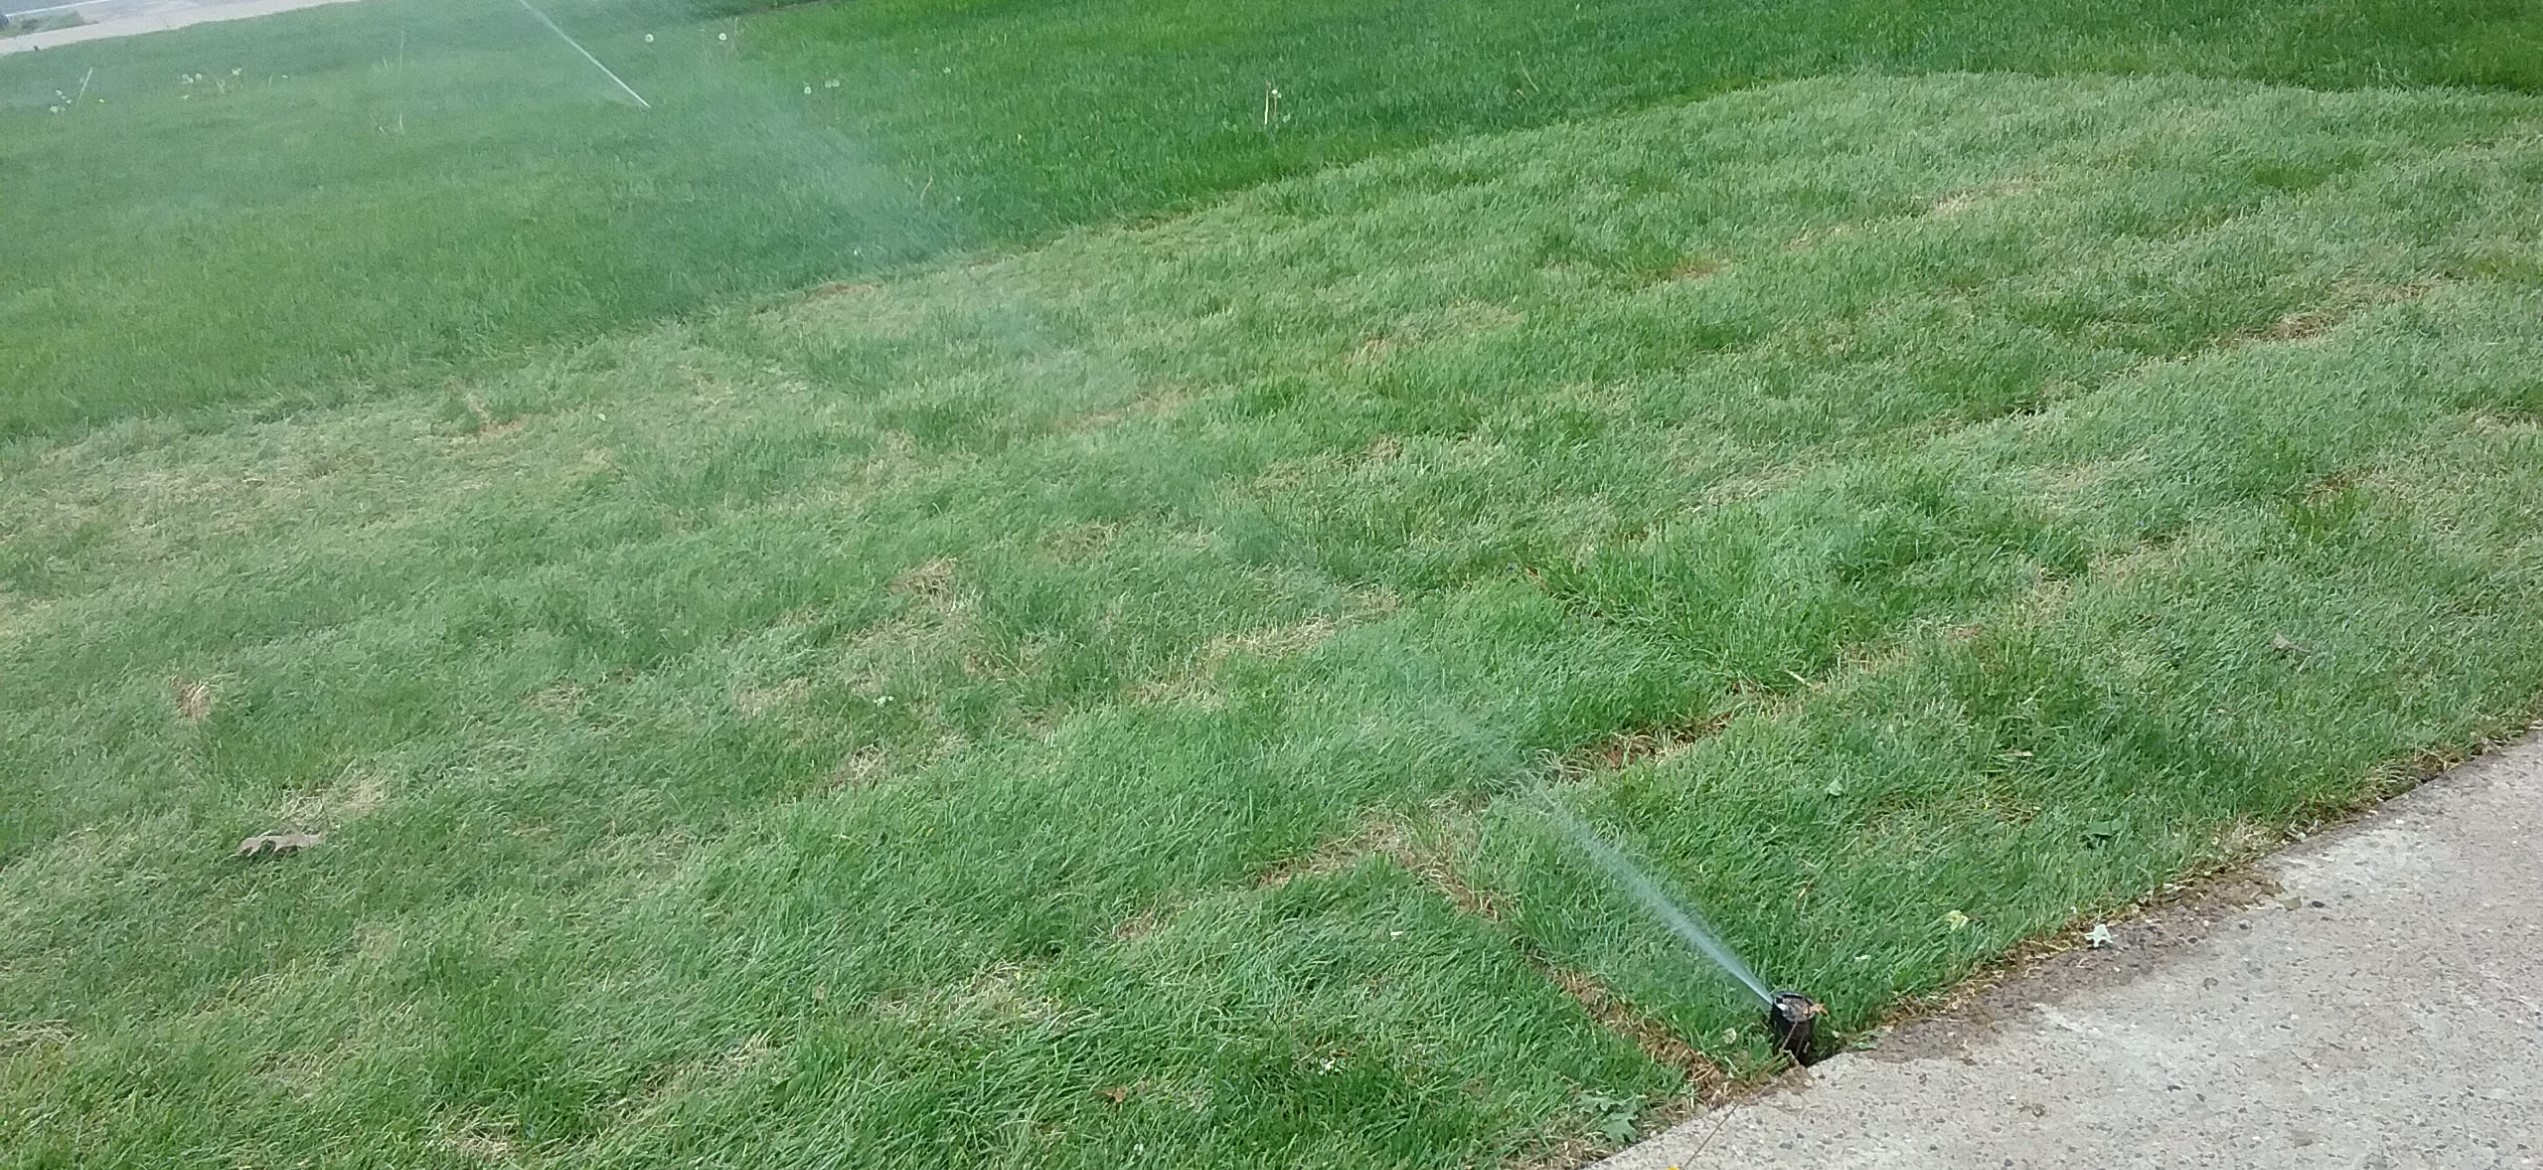 sod being irrigated